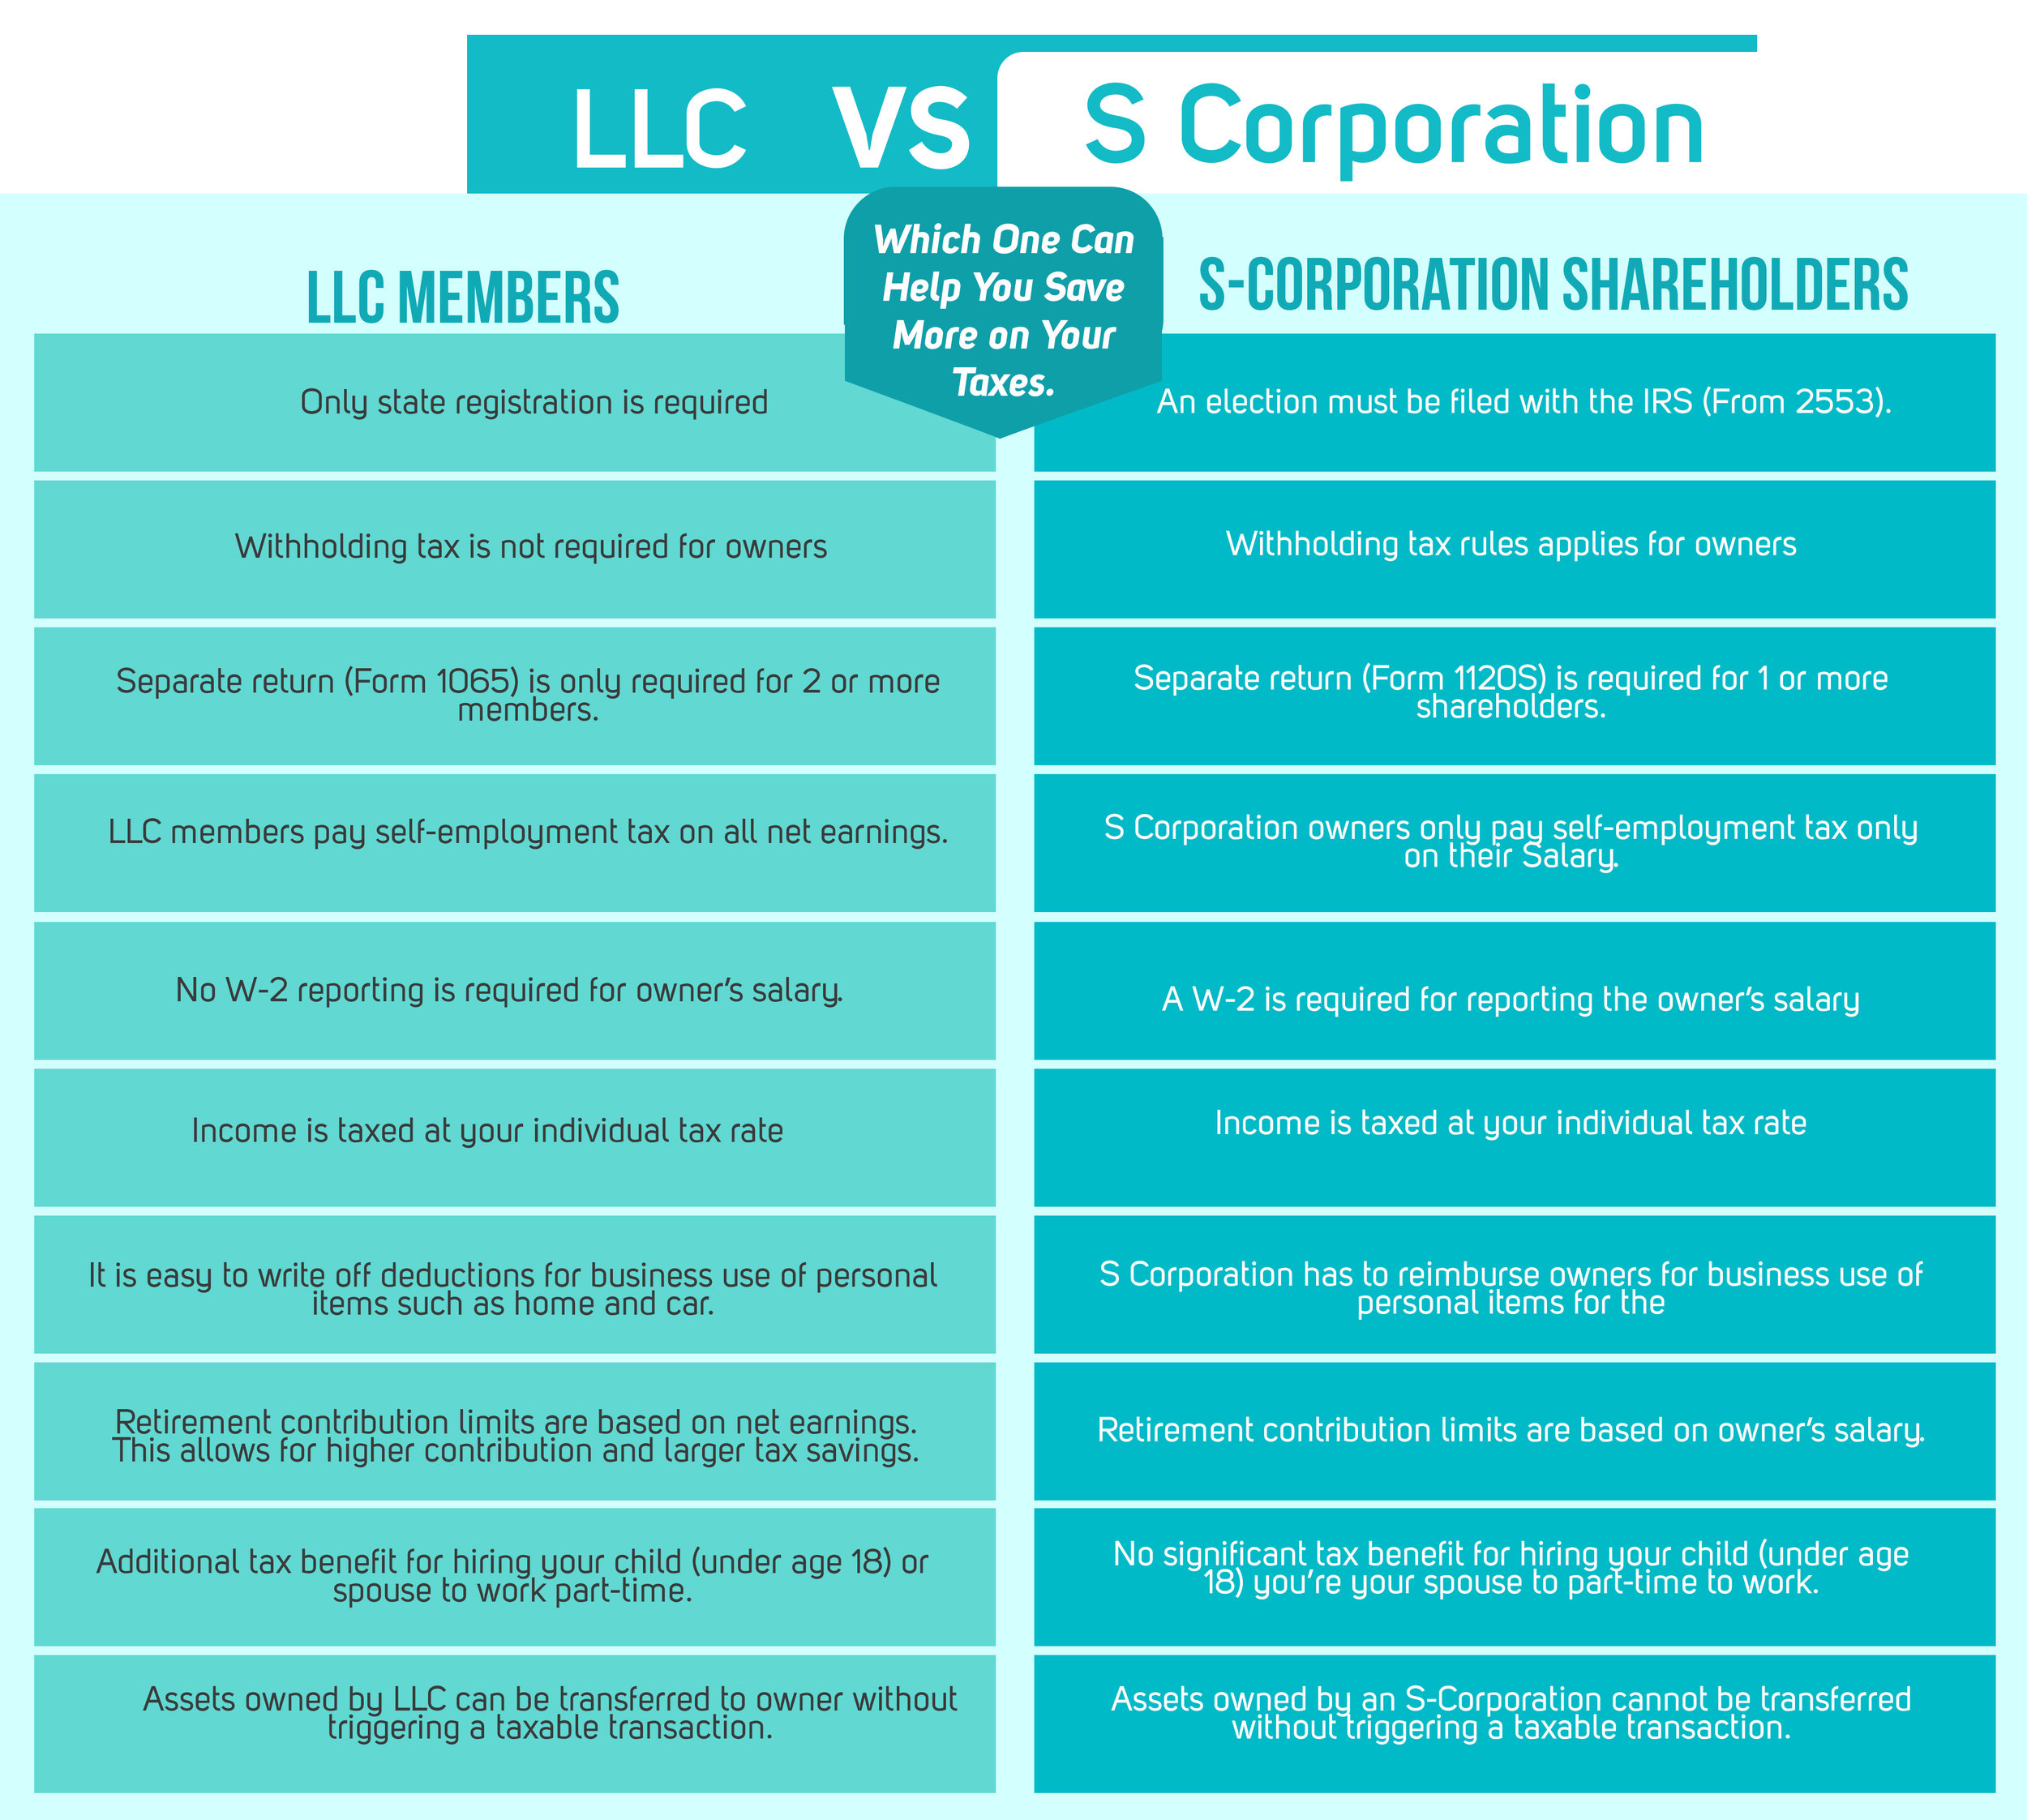 llc-vs-s-corporation-which-one-can-save-you-more-on-your-taxes-rba